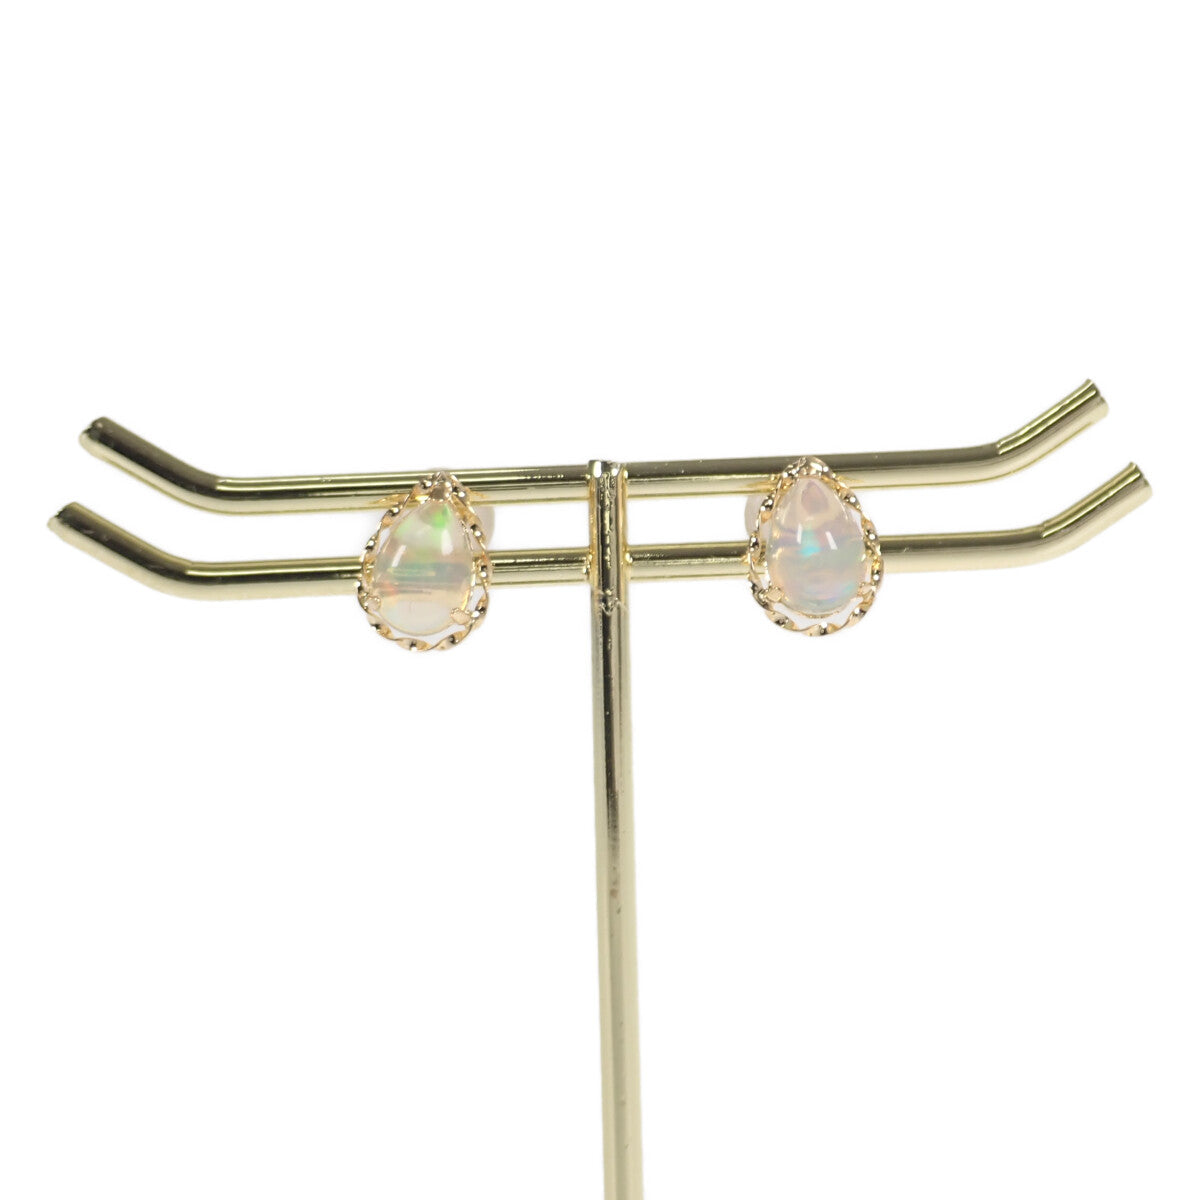 [LuxUness]  Women's 0.45ct Water Opal Design Earrings in K18 Yellow Gold, Gold, Never Used, Pre-owned in Brand new